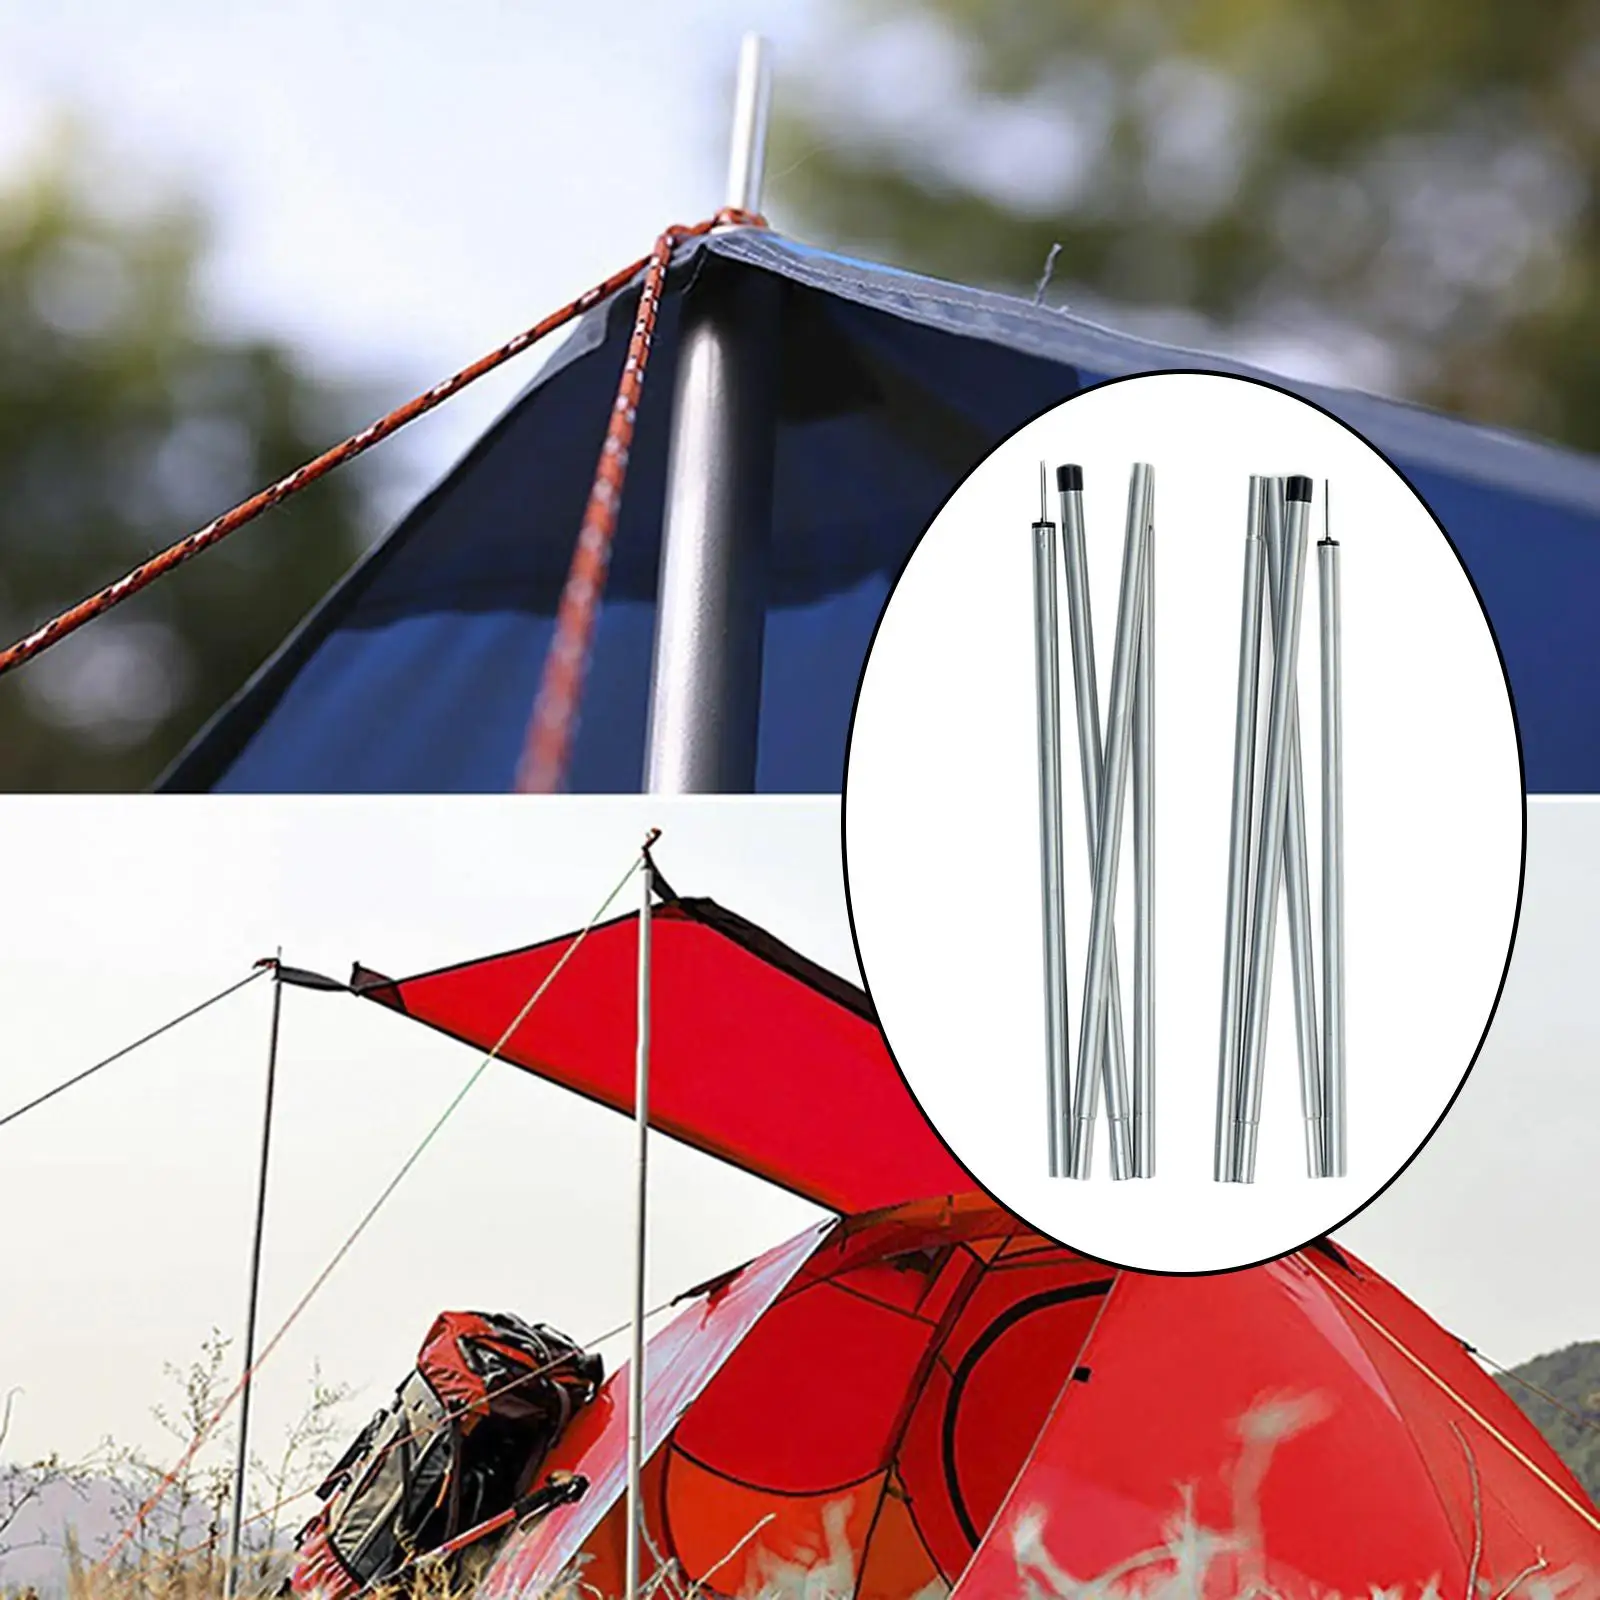 8Pcs Telescopic Tent Tarp Poles Camping 21.7inch Outdoor Portable Adjustable Replacement Stick for Camp Tent Canopy Car Canopy